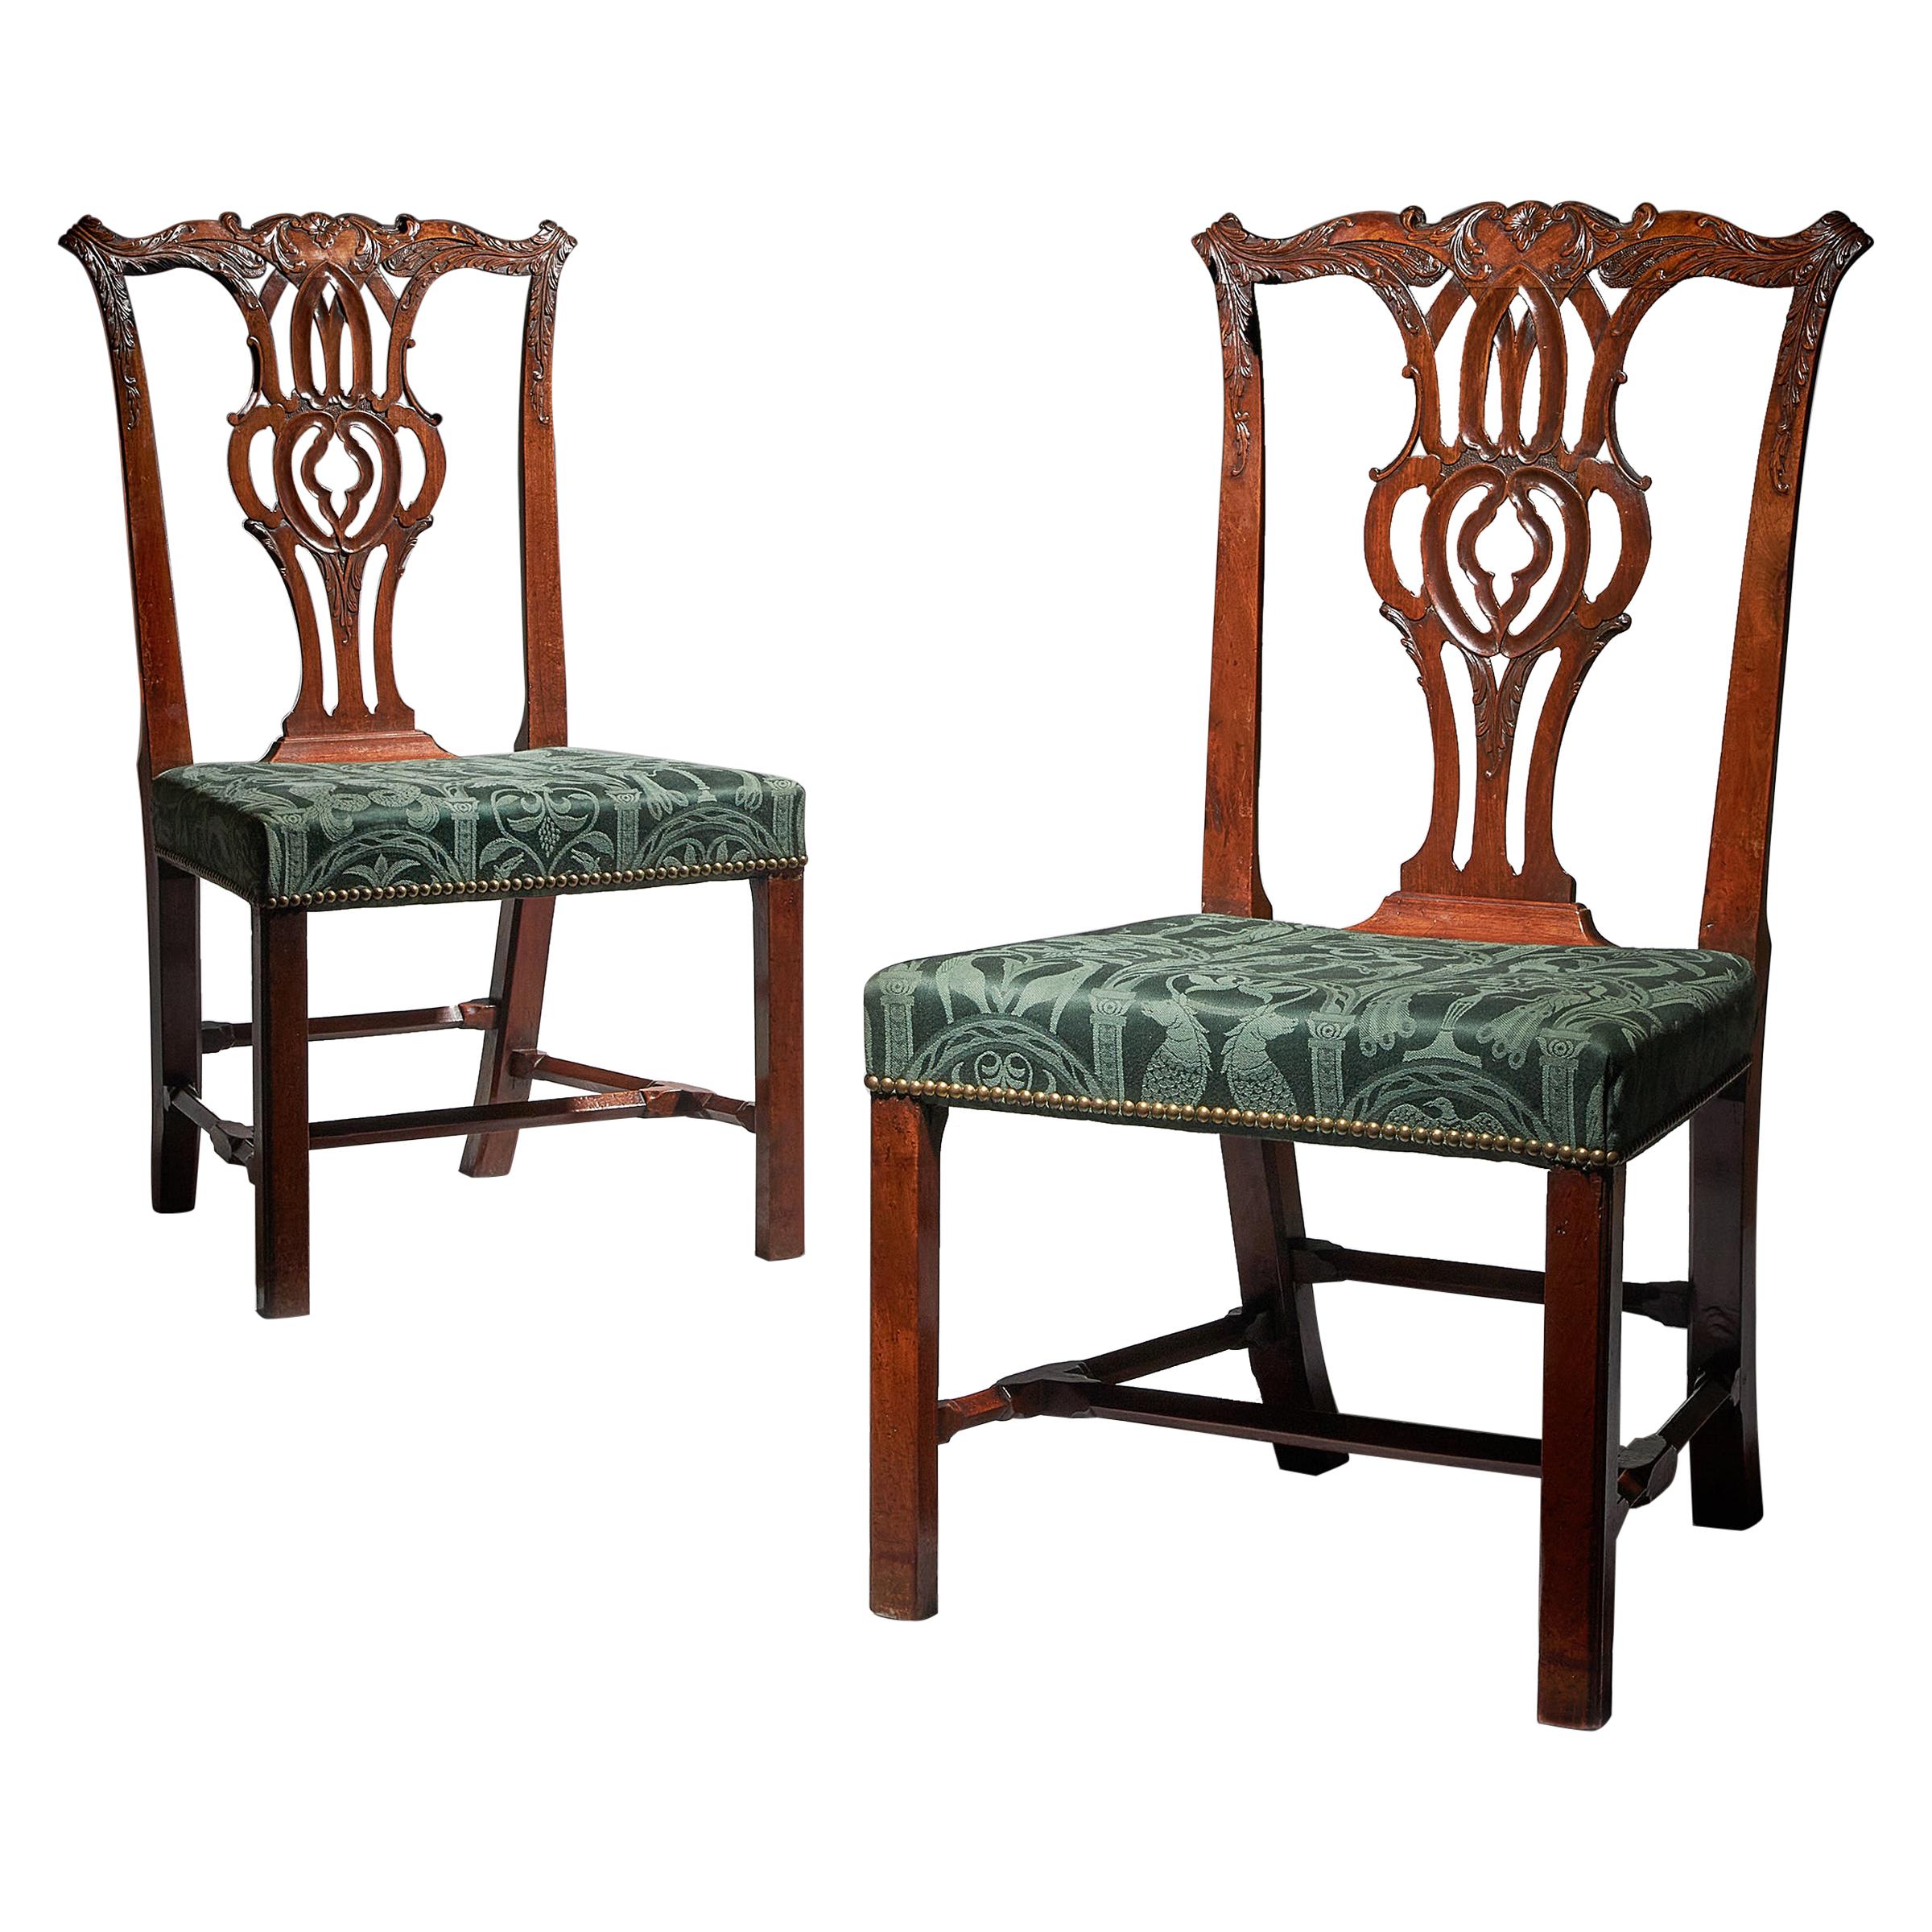 Pair of 18th Century George III Carved Mahogany Chippendale Chairs 1